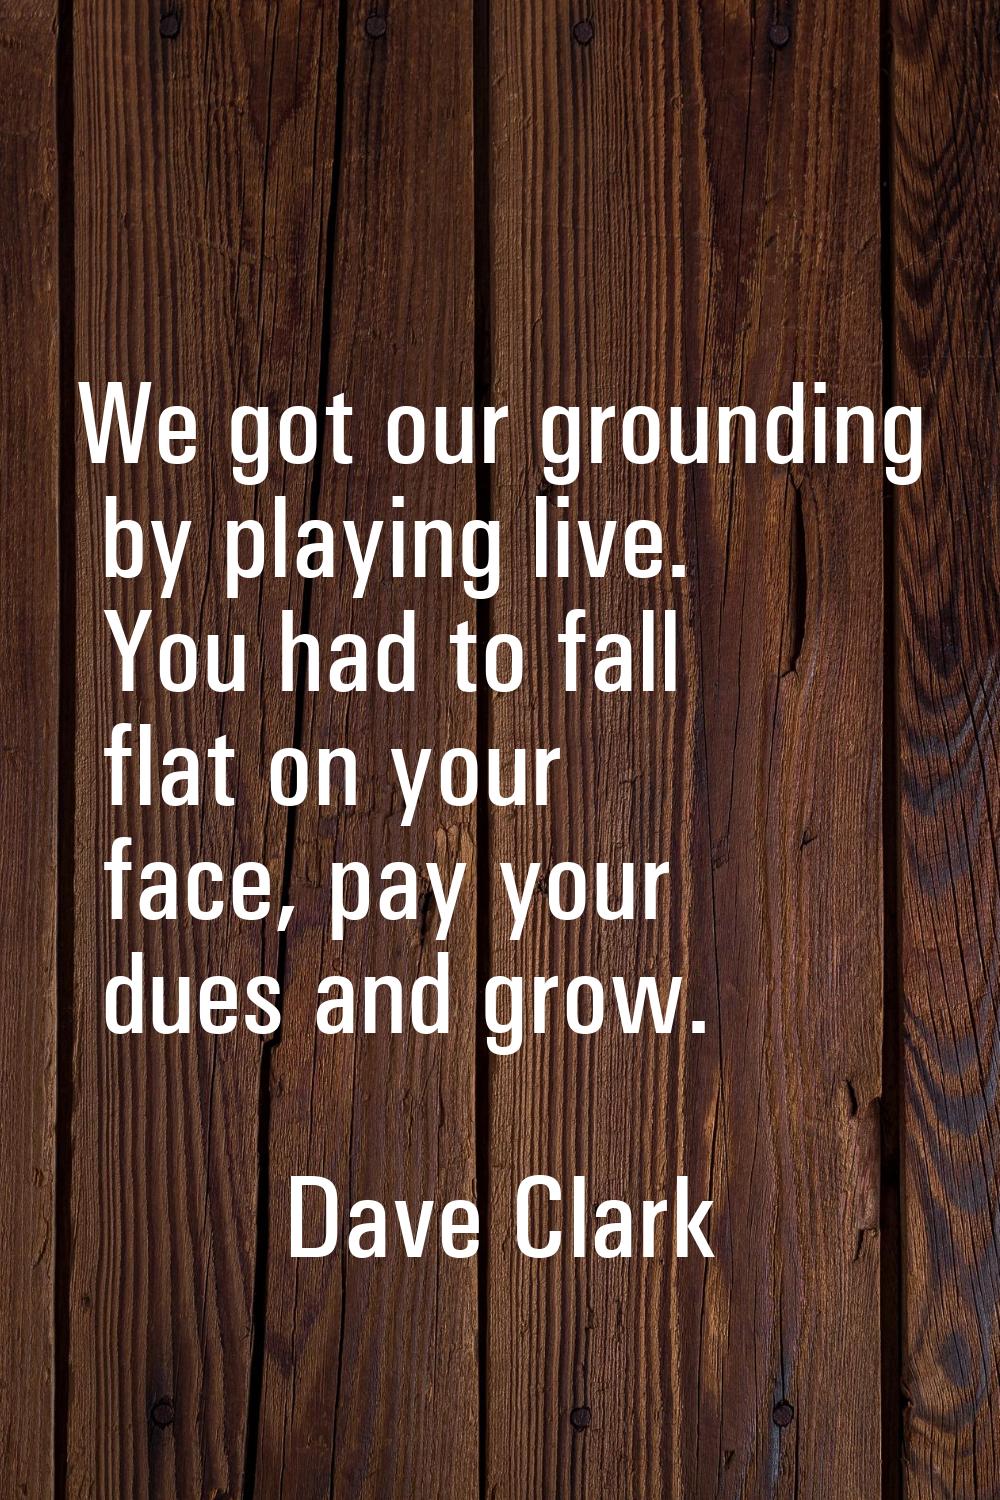 We got our grounding by playing live. You had to fall flat on your face, pay your dues and grow.